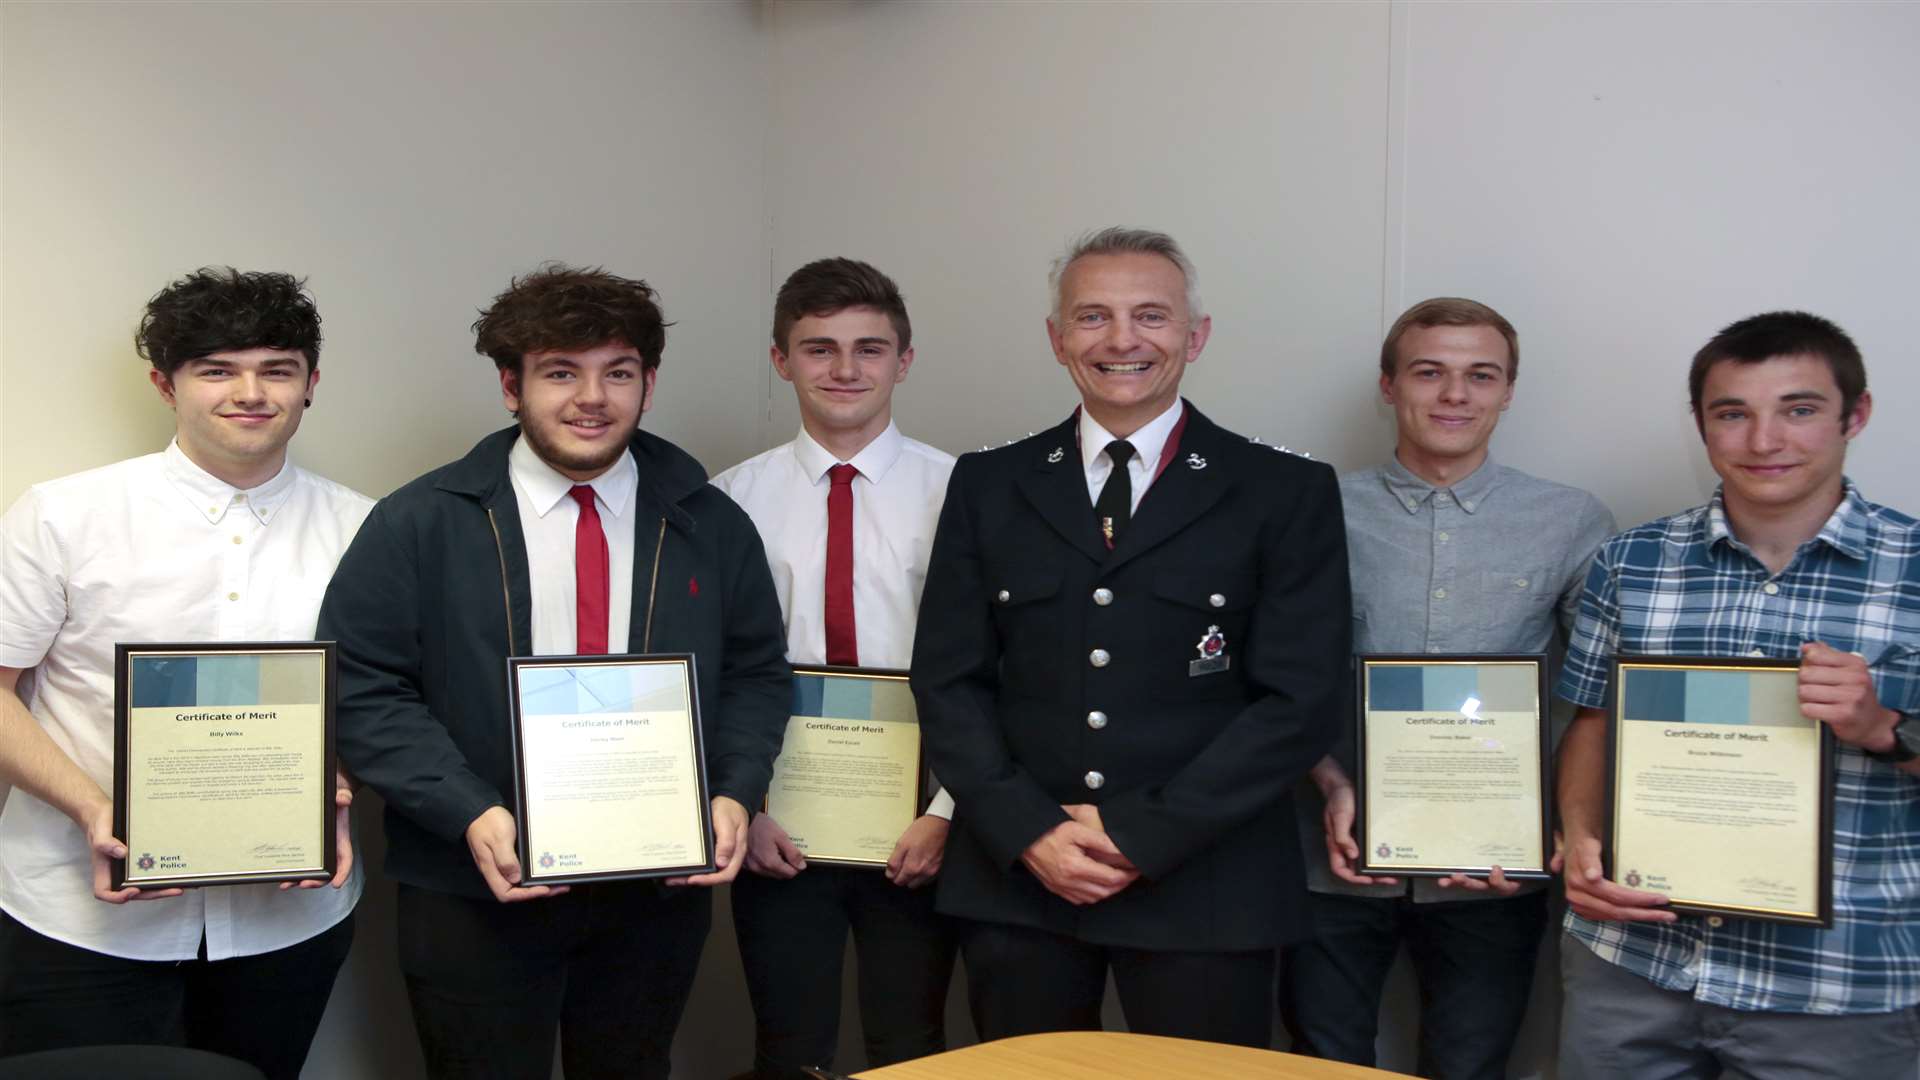 The young heroes: Billy Wilks, Harkley West, Daniel Excell, Dominic Baker and Bruce Wilkinson with Chief Inspector Mick Gardner